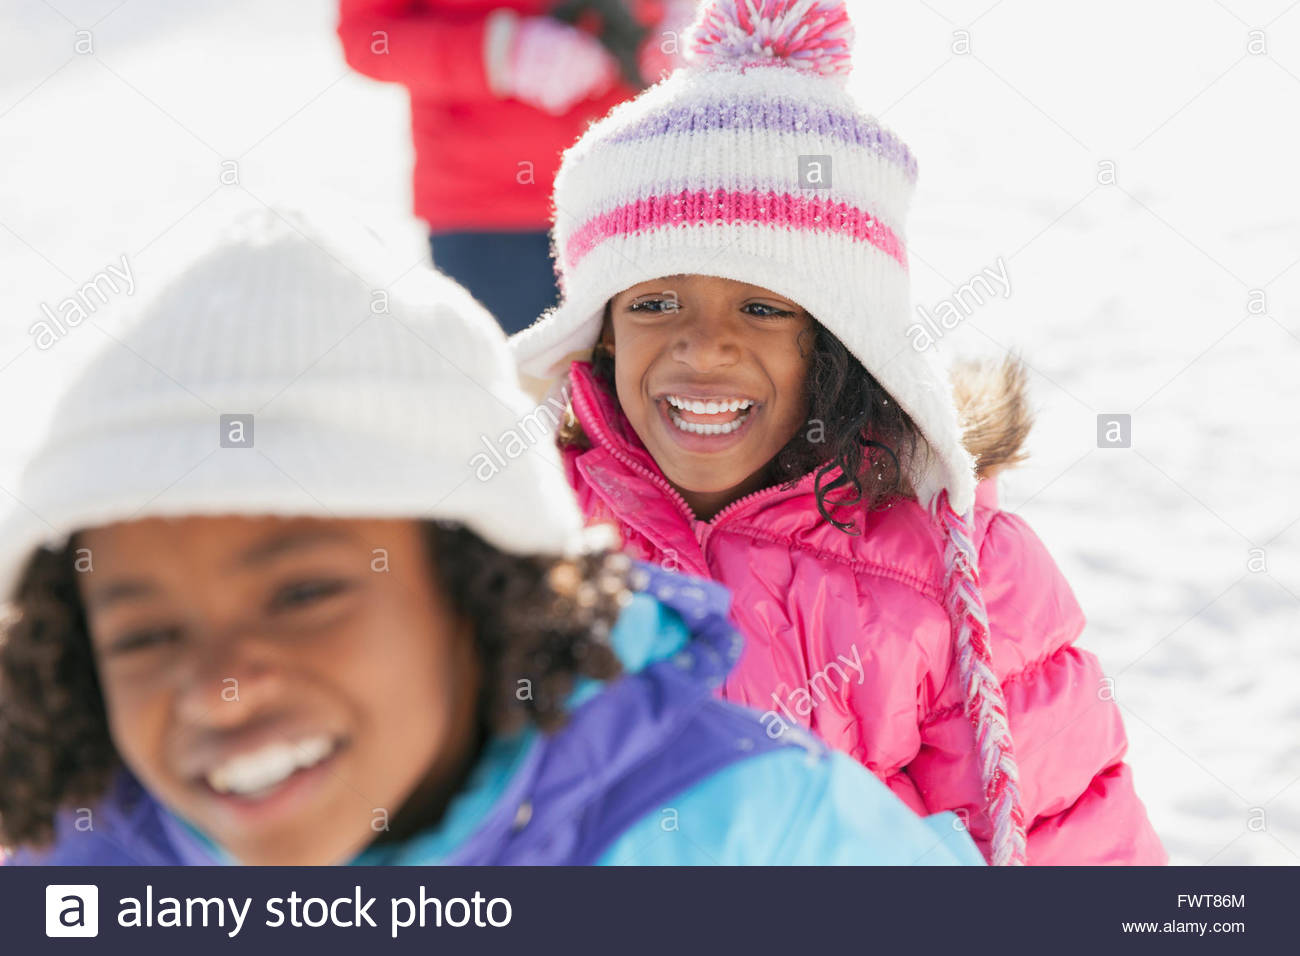 Cheerful little girls outdoors in winter Stock Photo